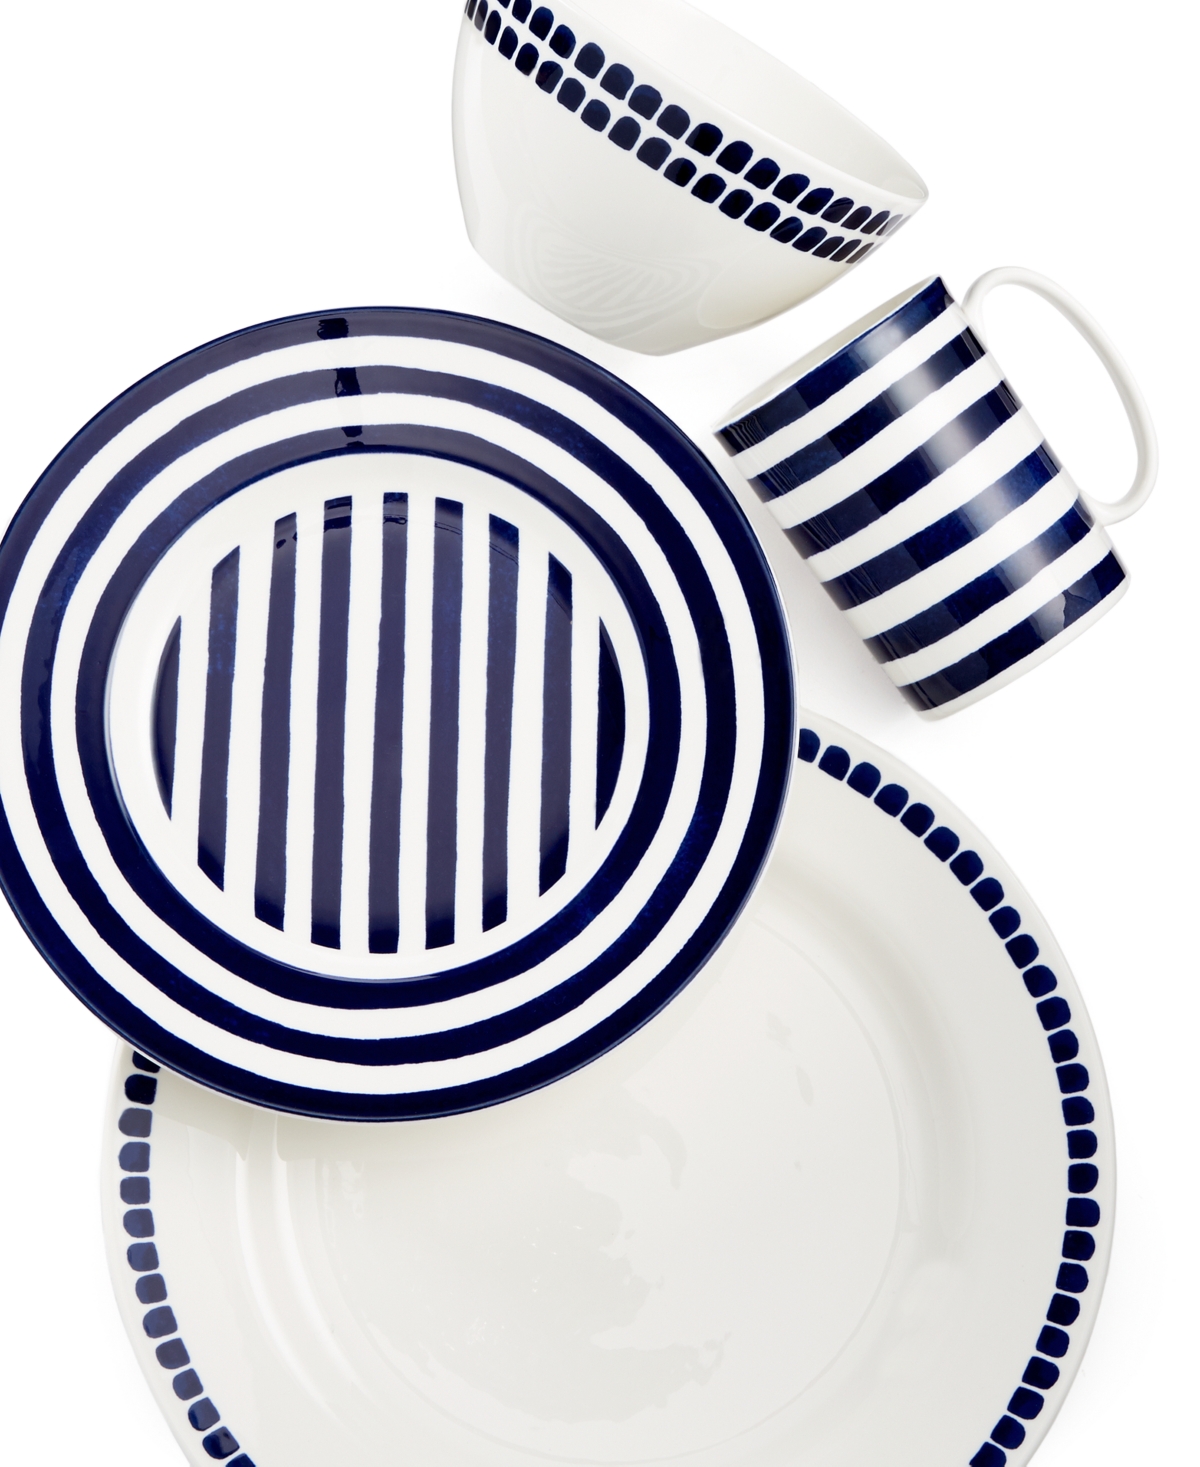 Charlotte Street North 4 Piece Place Setting - White/Blue